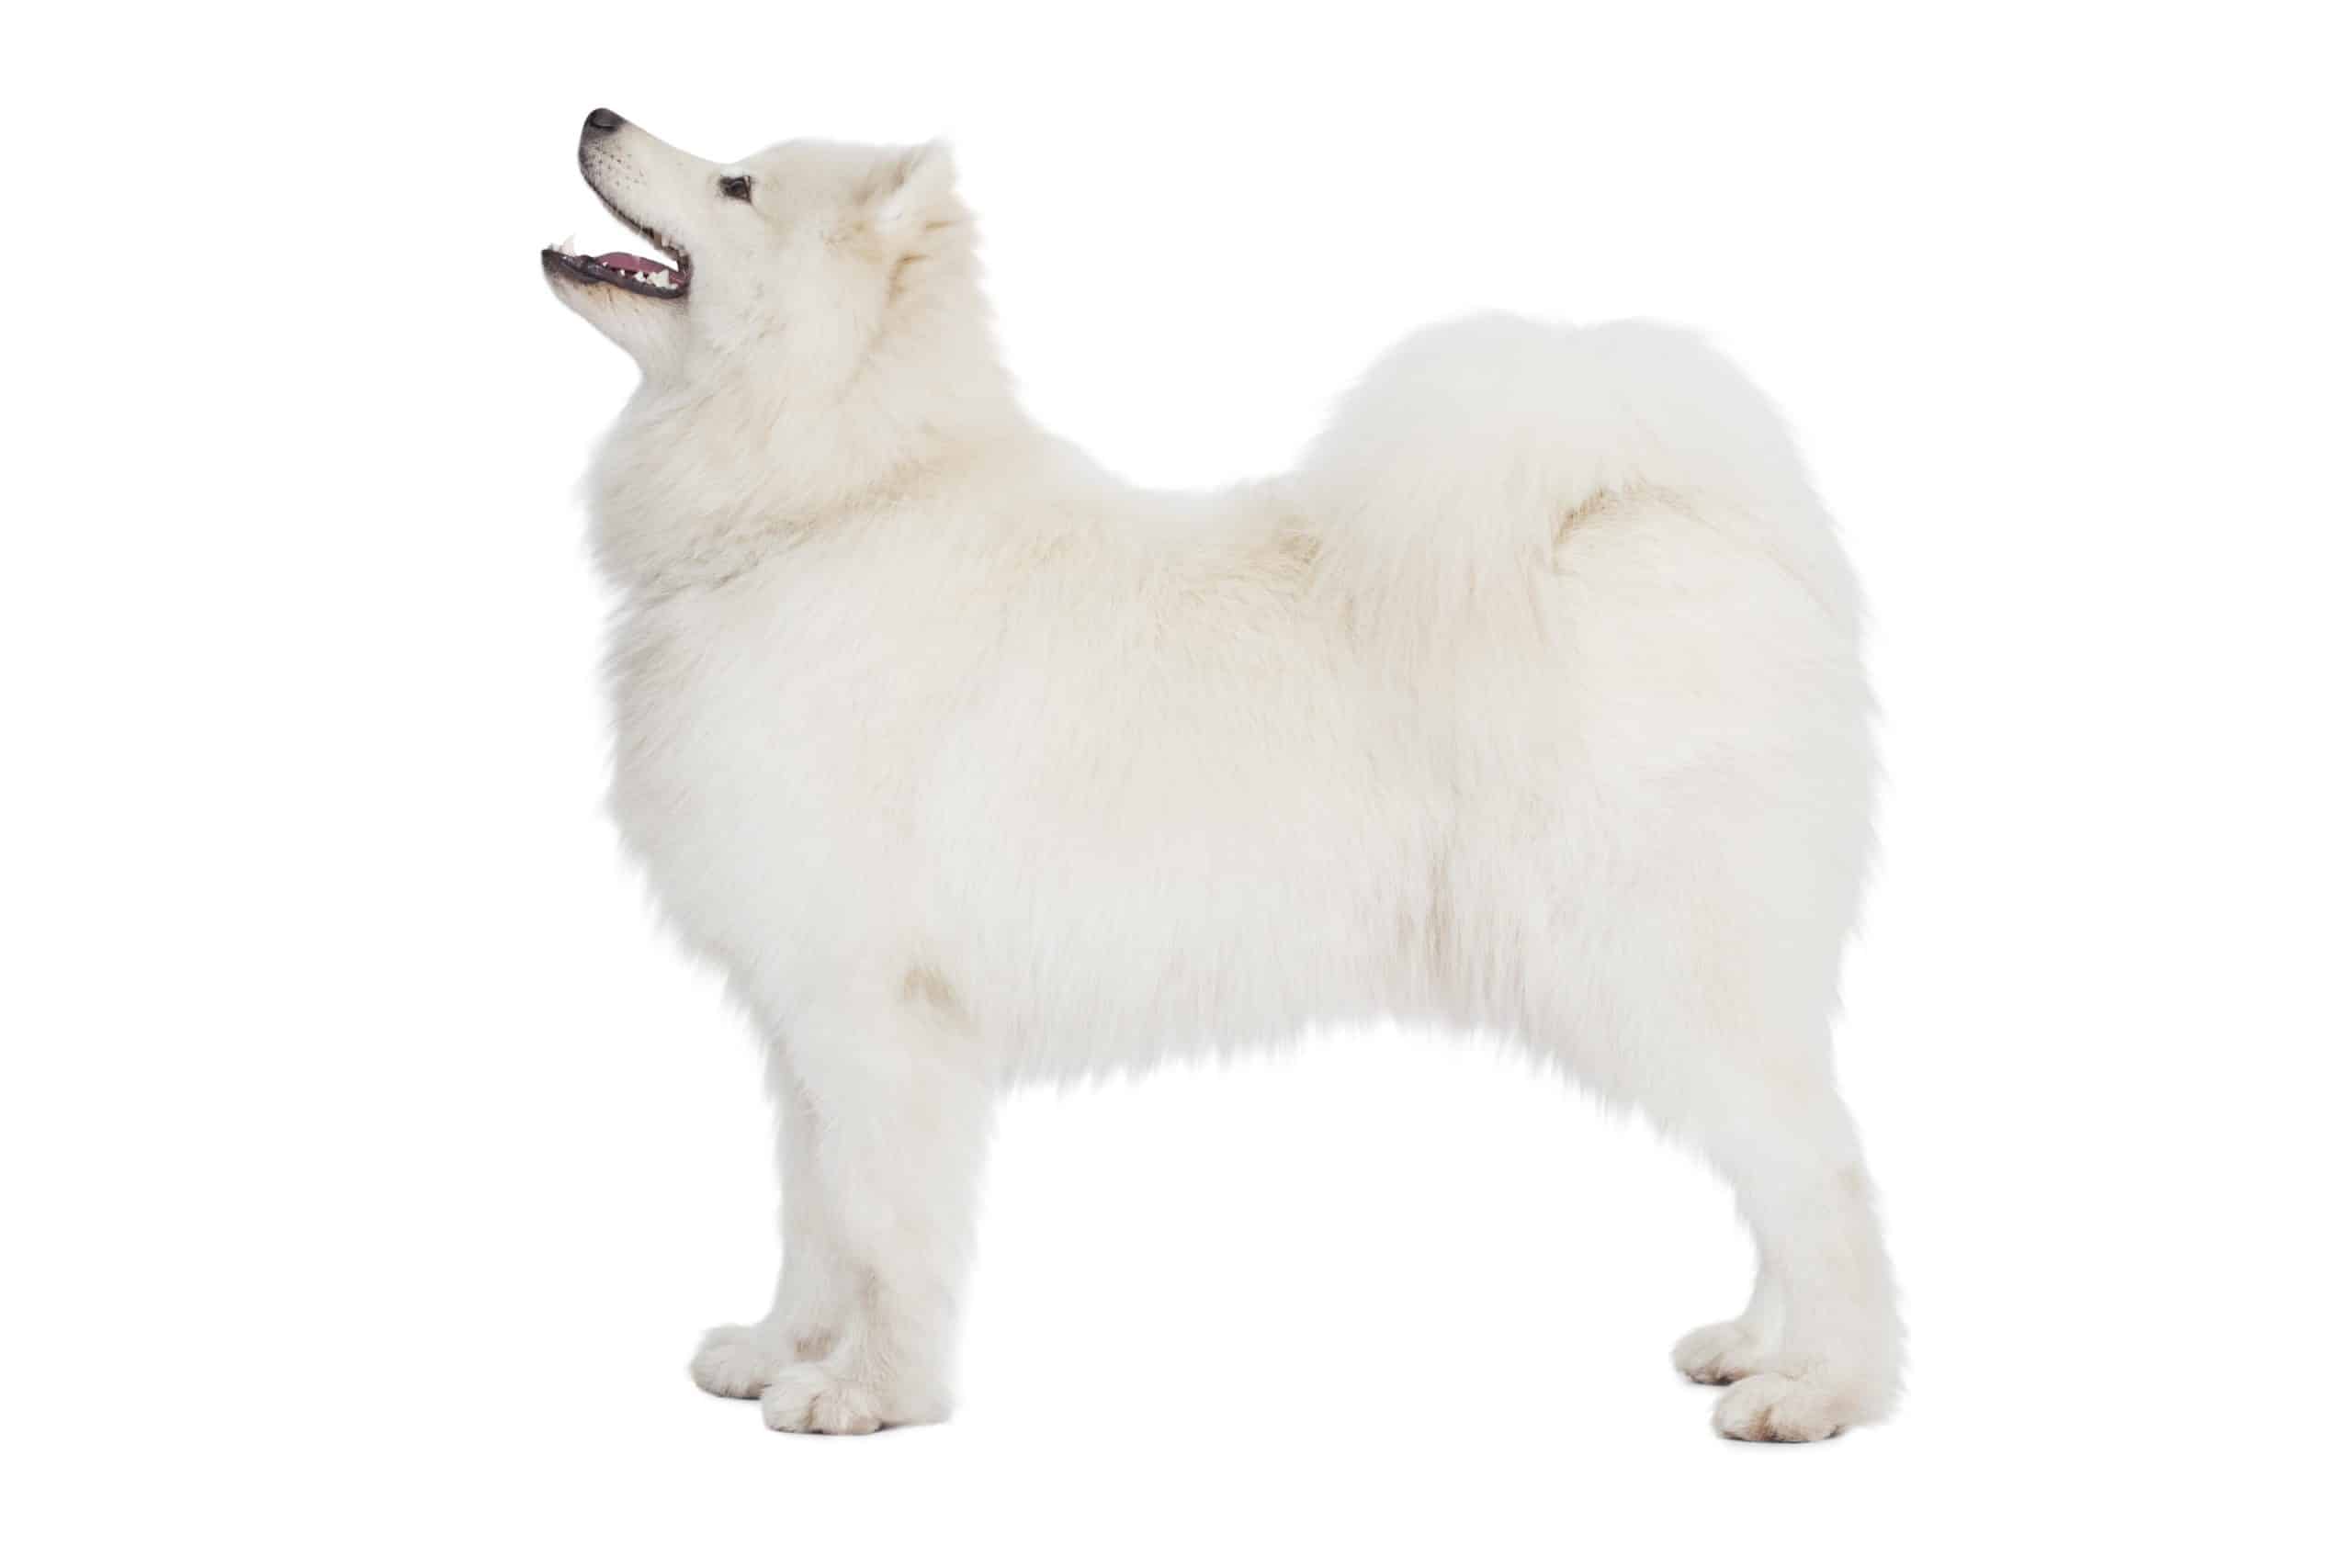 Samoyed on a white background. The Samoyed needs regular grooming, lots of exercise, and an owner willing to take the time to form a close relationship with them.